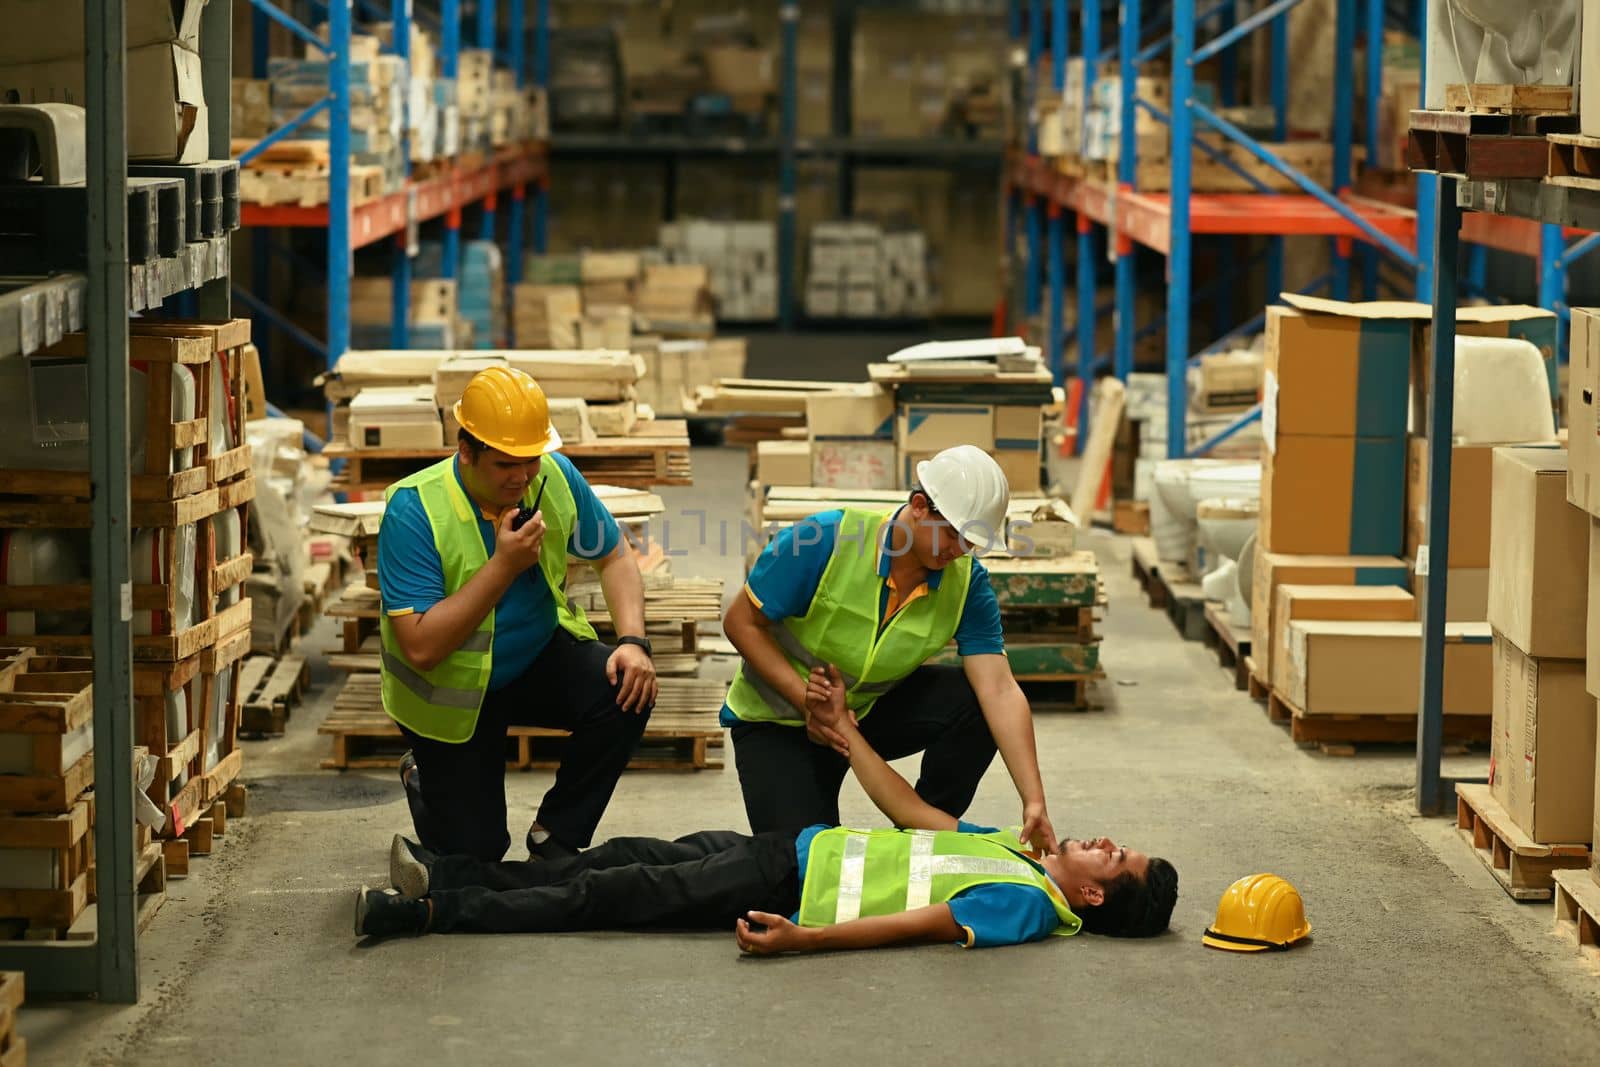 Two industrial worker are helping and giving the injured first aid to man lying unconscious on concrete floor by prathanchorruangsak